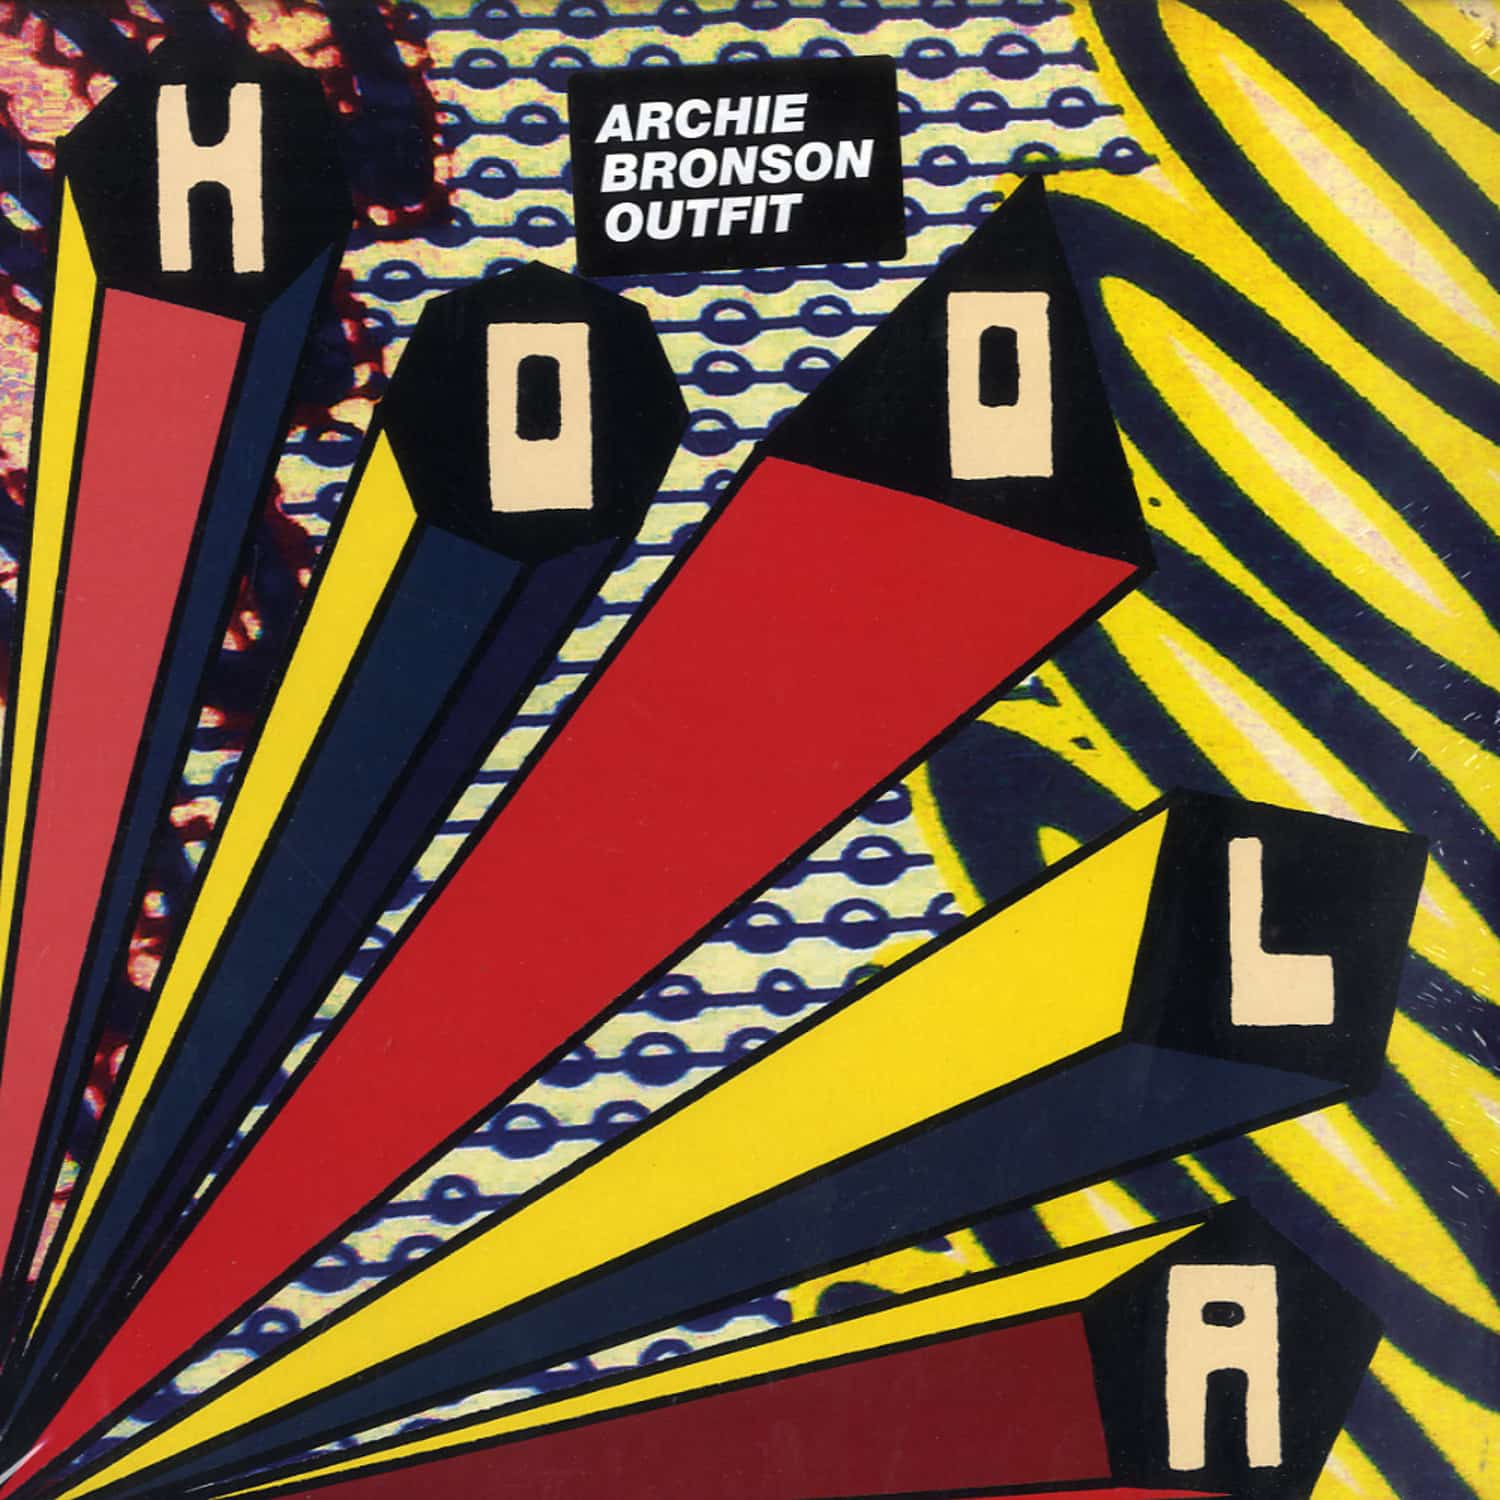 Archie Bronson Outfit - HOOLA / MCDE & 6TH BOROUGH PROJECT REMIX